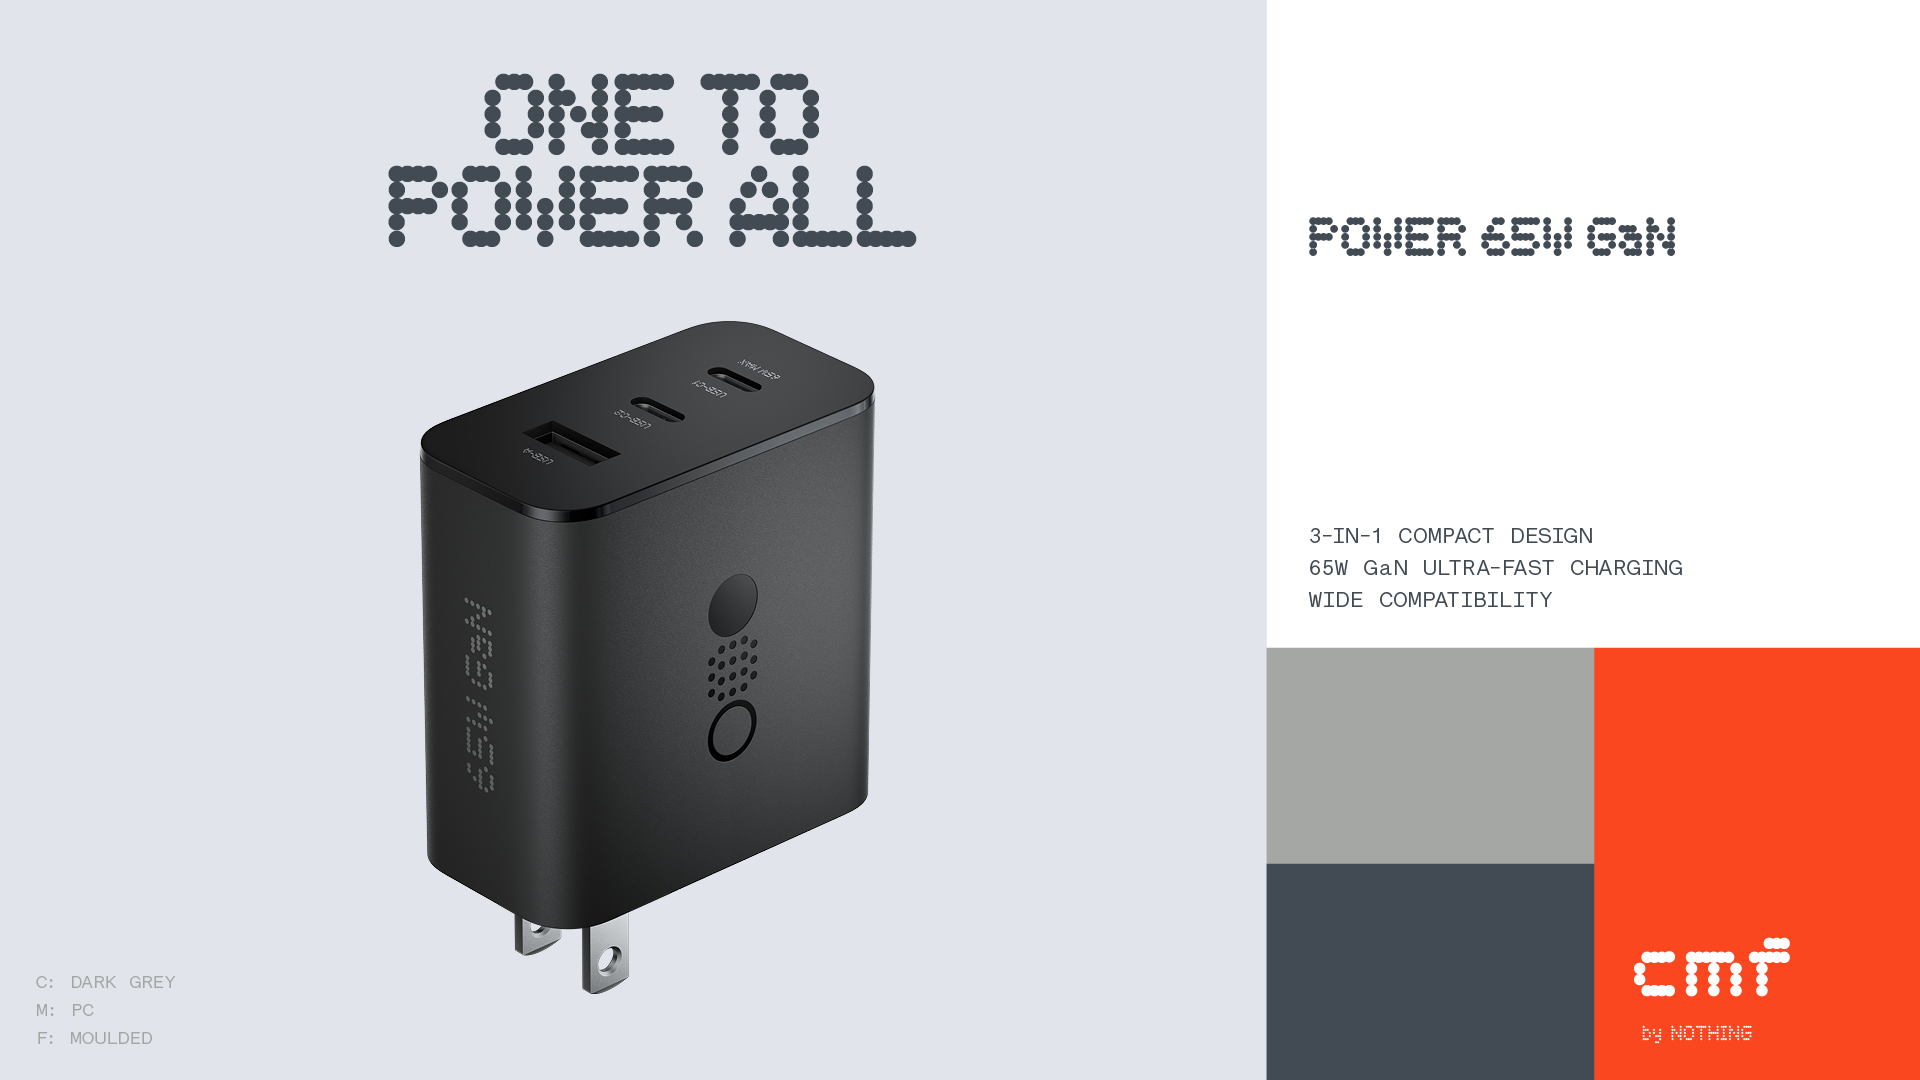 cmf by nothing power 65w gan | wonderful by design - the go android